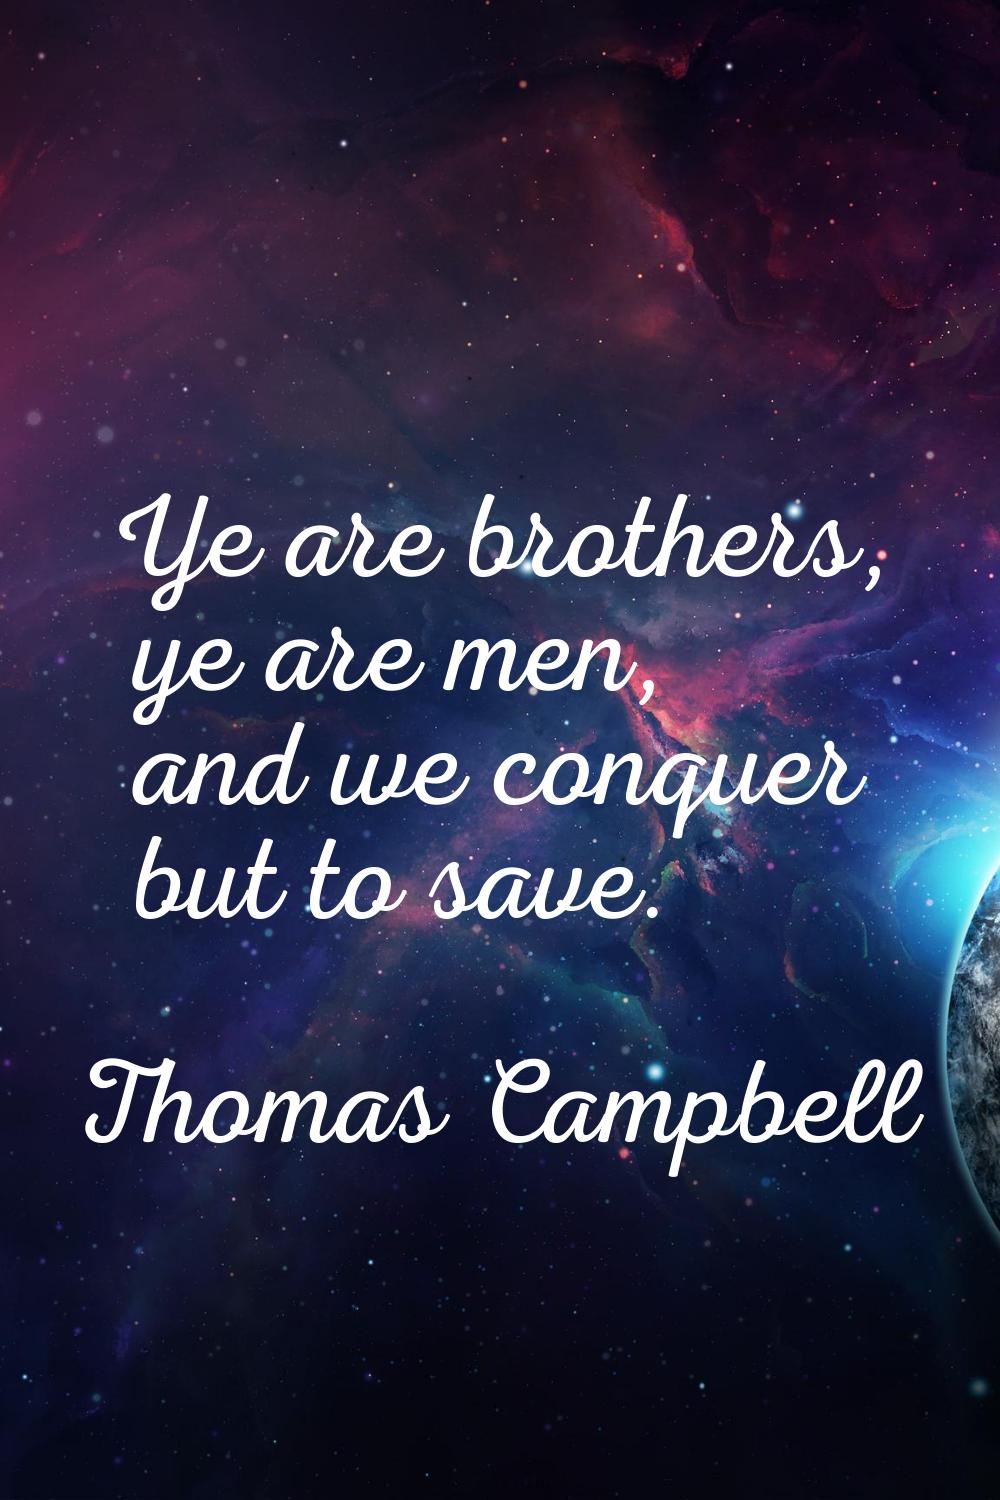 Ye are brothers, ye are men, and we conquer but to save.